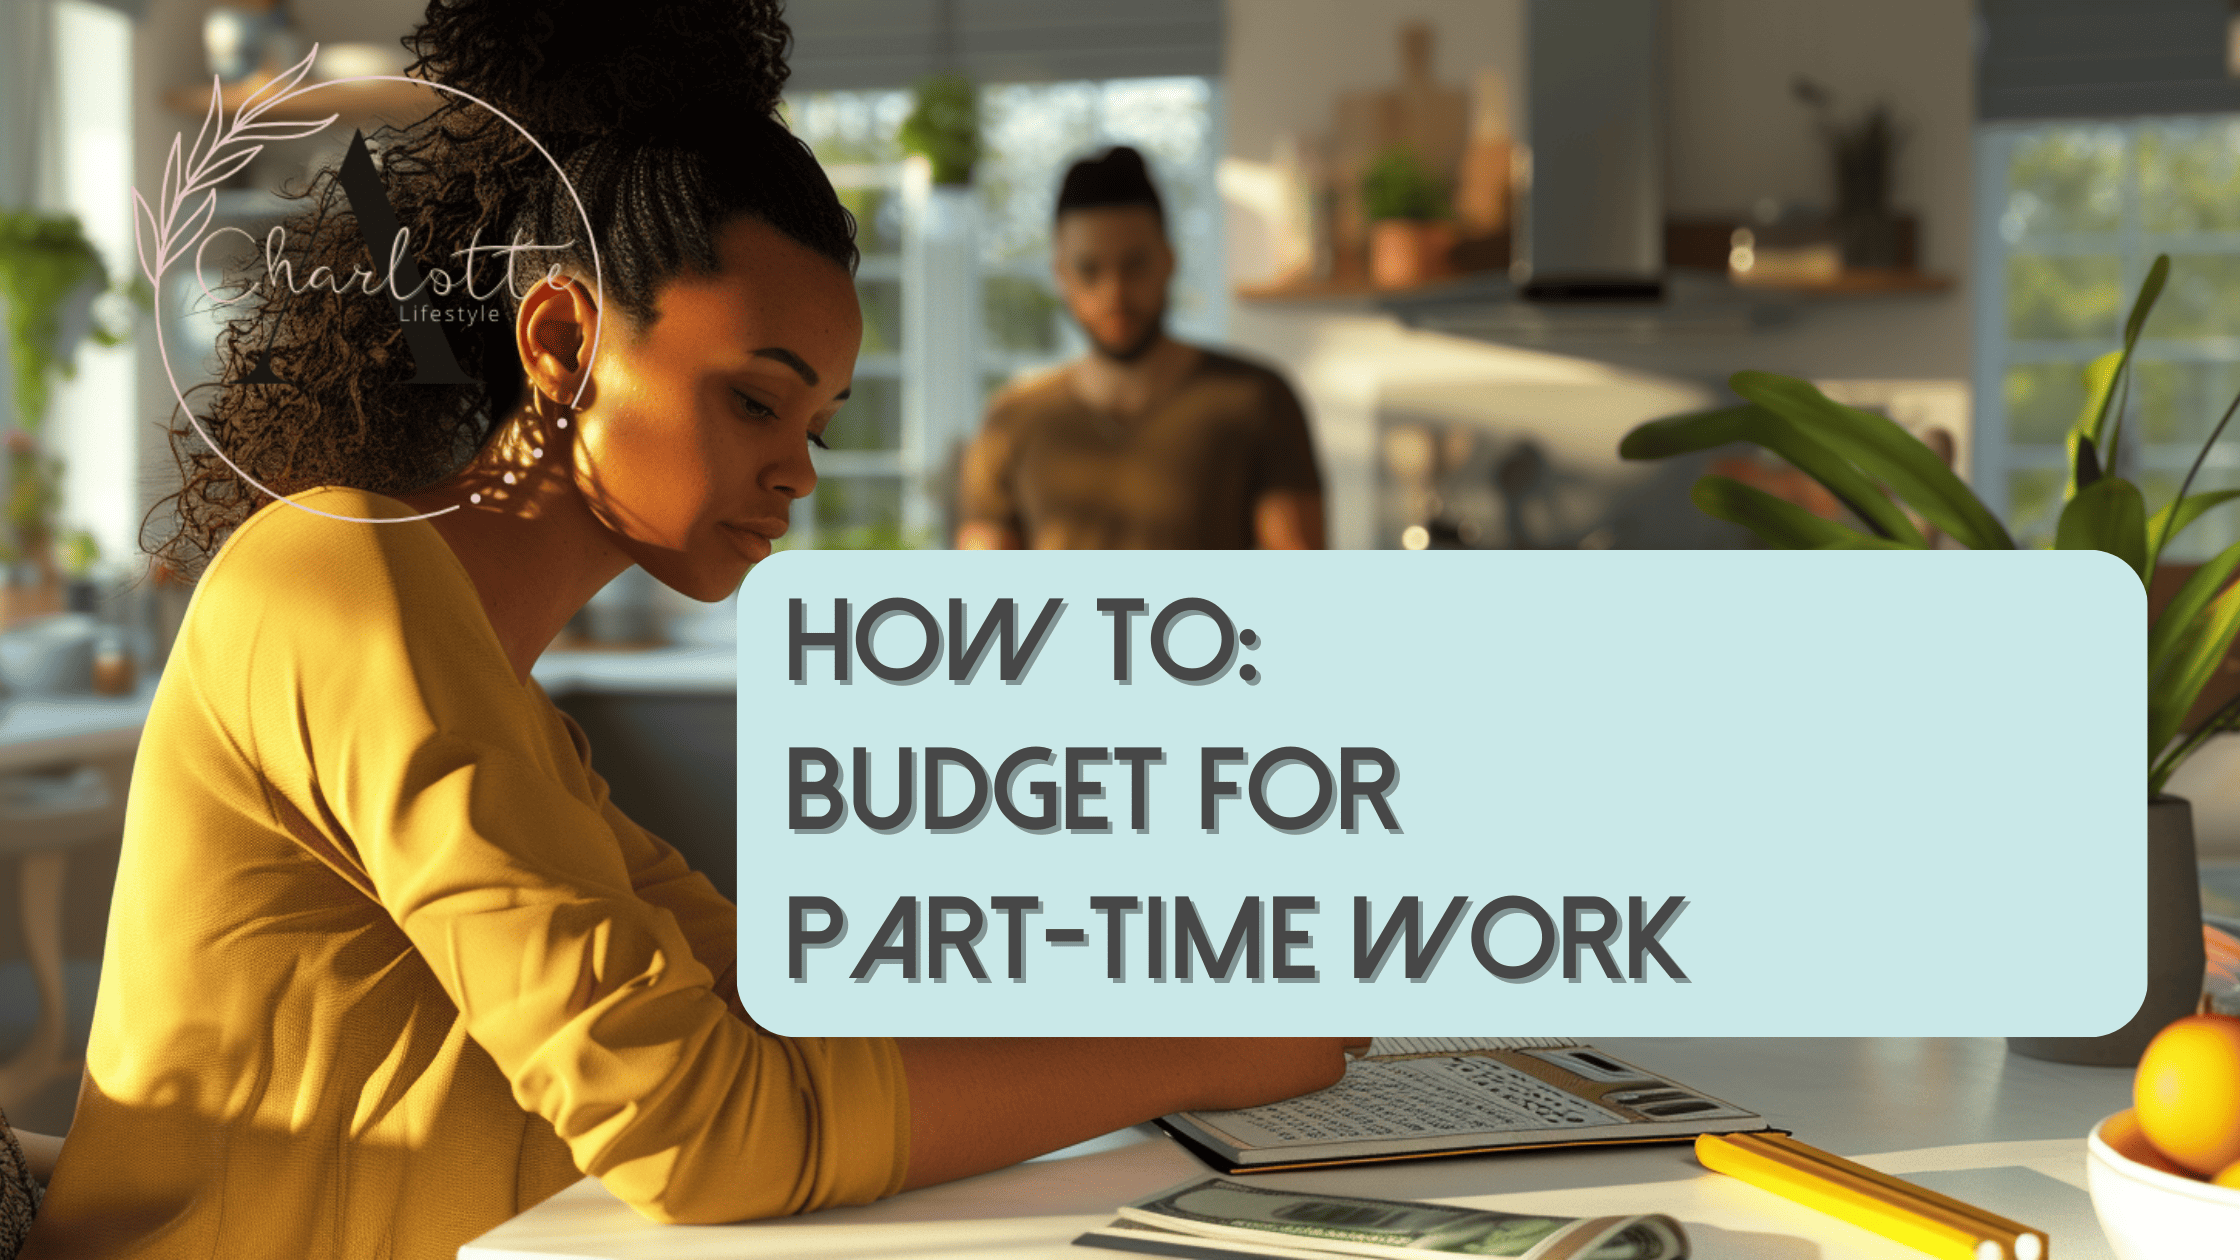 Budget For Part-Time Work